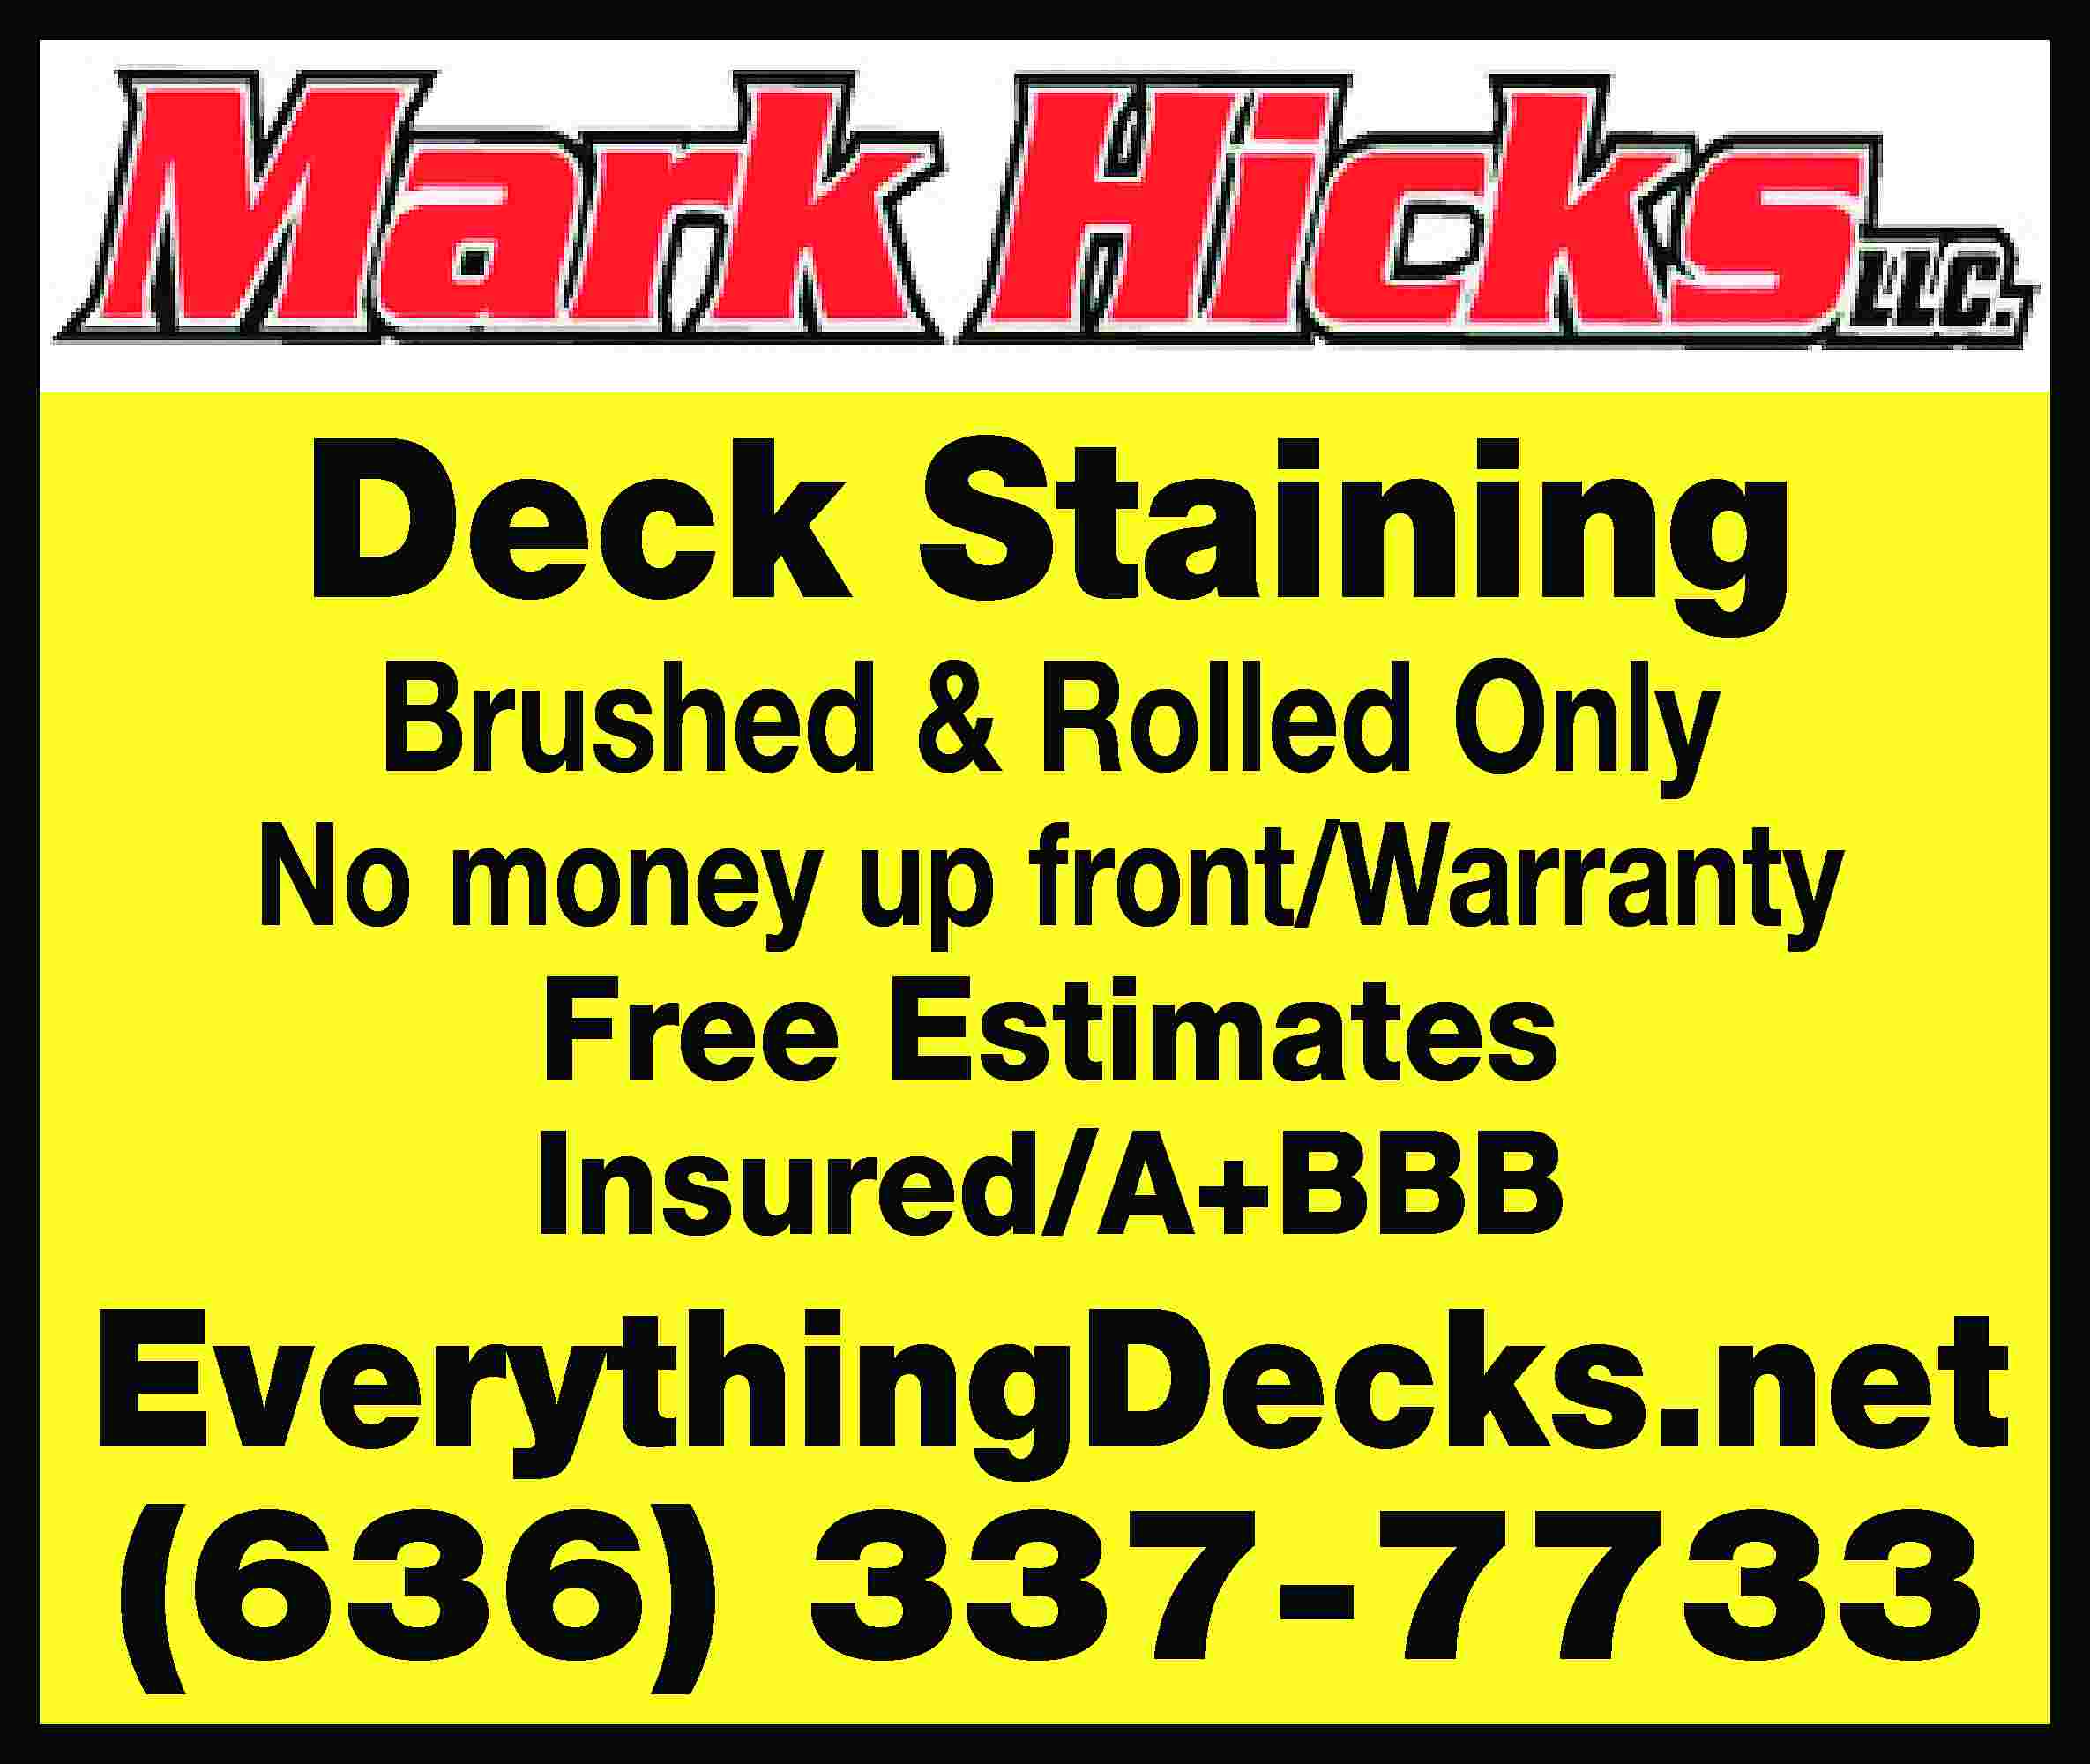 Deck Staining Brushed & Rolled  Deck Staining Brushed & Rolled Only No money up front/Warranty Free Estimates Insured/A+BBB EverythingDecks.net (636) 337-7733